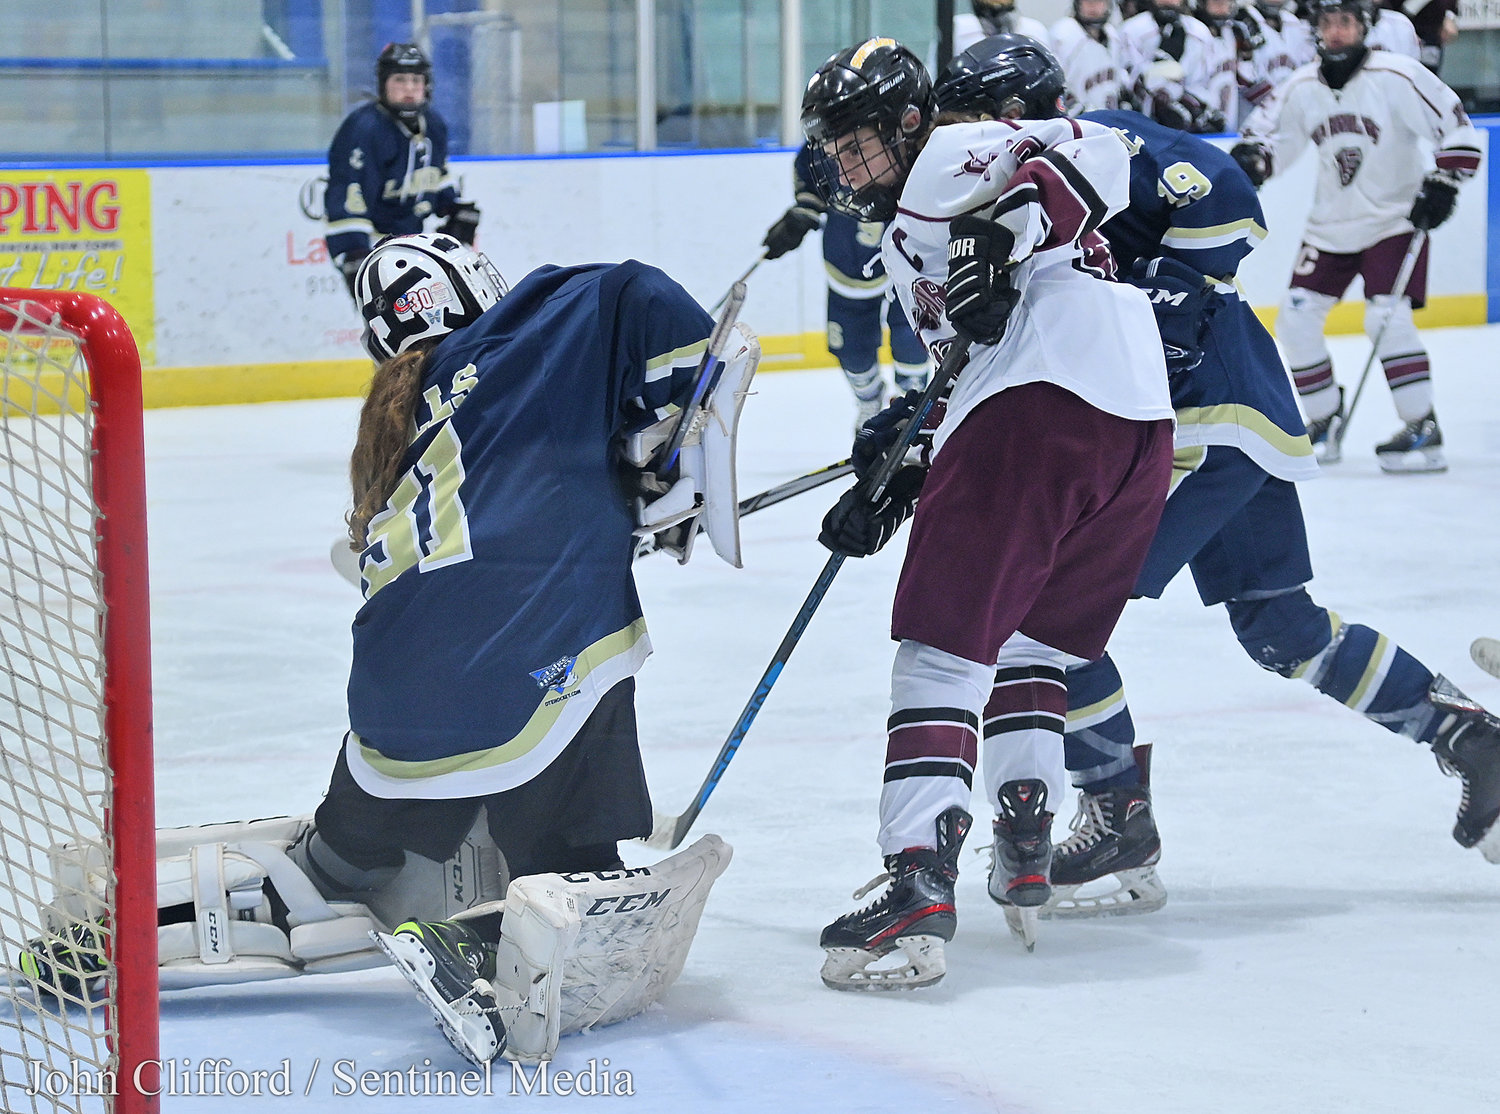 The Clinton Warriors in action against the Skaneateles Lakers in the Section III girls ice hockey championship Wednesday night in Nedrow. Clinton beat Skaneateles 1-0 in overtime. Clinton #22 watches the puck with Lakers #31 making the save.